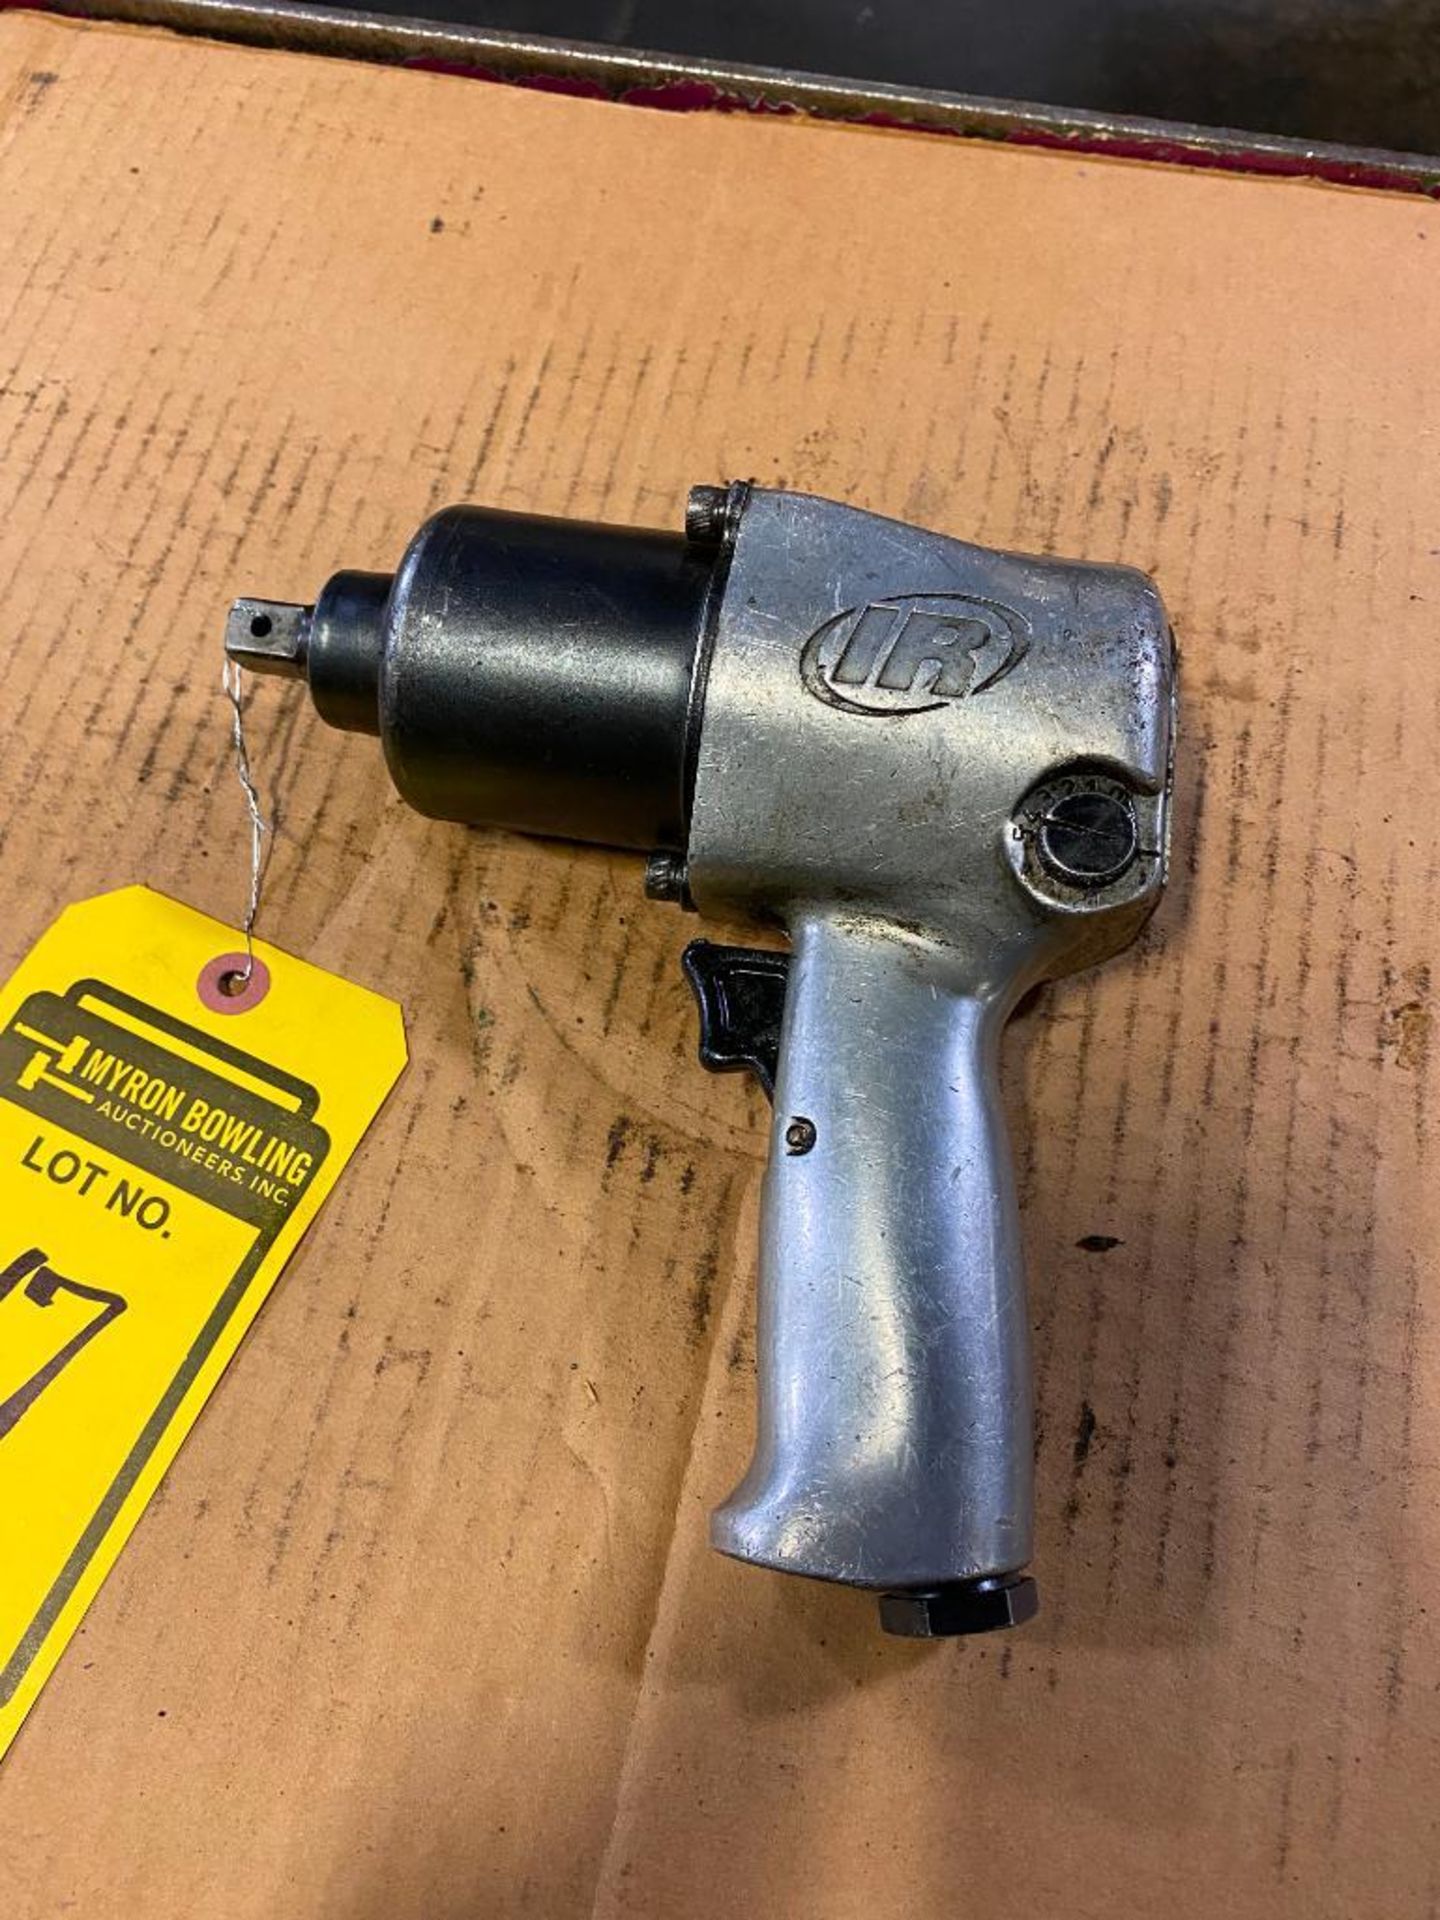 Ingersoll Rand 1/2" Pneumatic Impact Wrench - Image 2 of 2